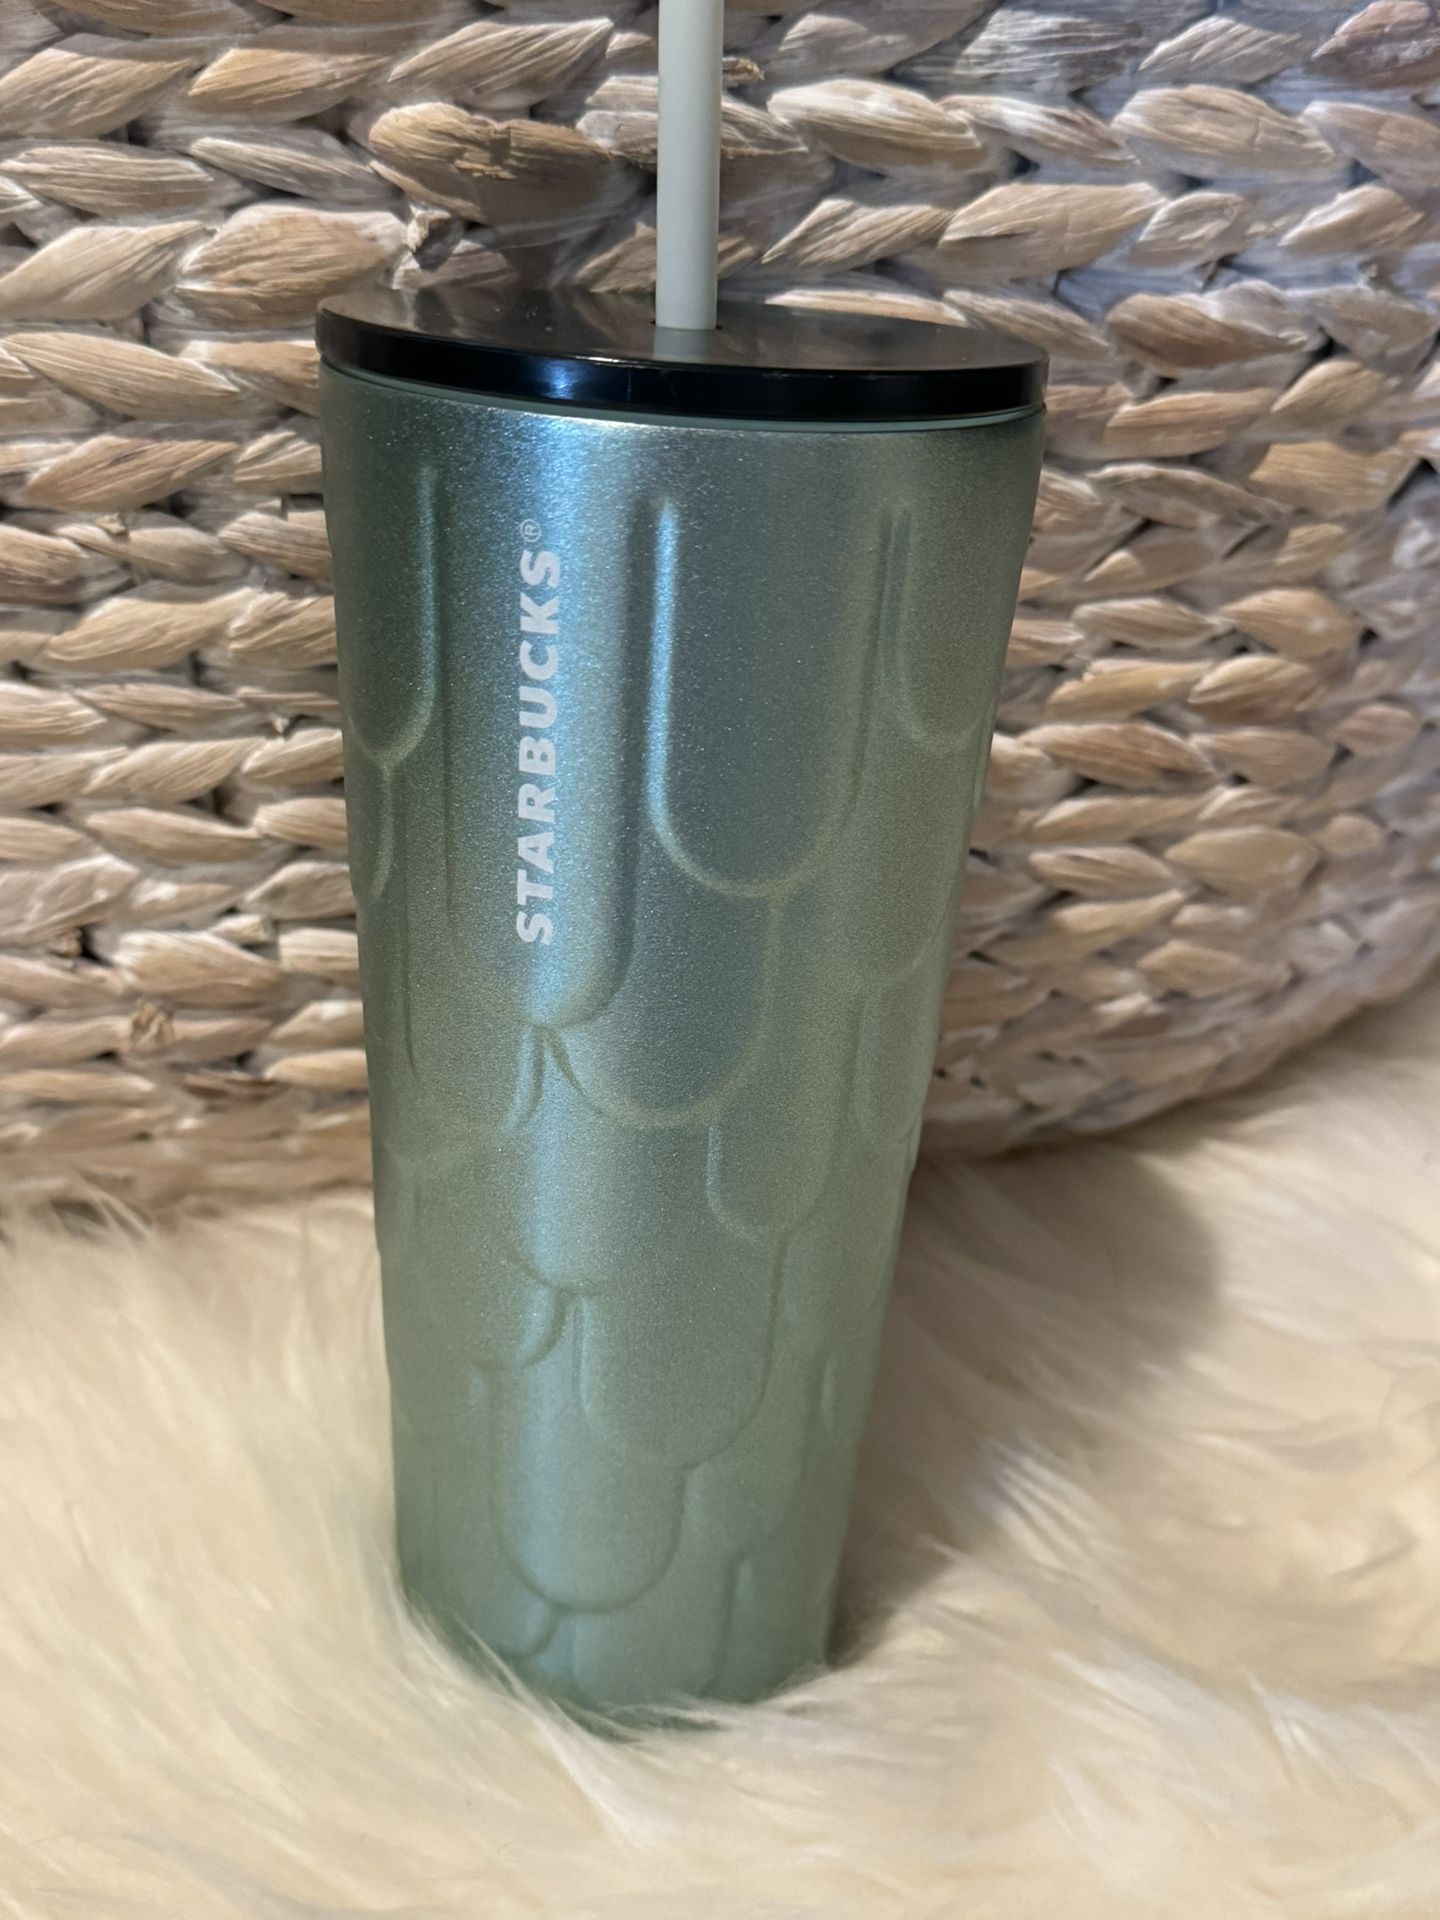 Starbucks Tumbler 24oz Mermaid Scales Green Glitter Textured 2022. IN LIKE NEW CONDITION